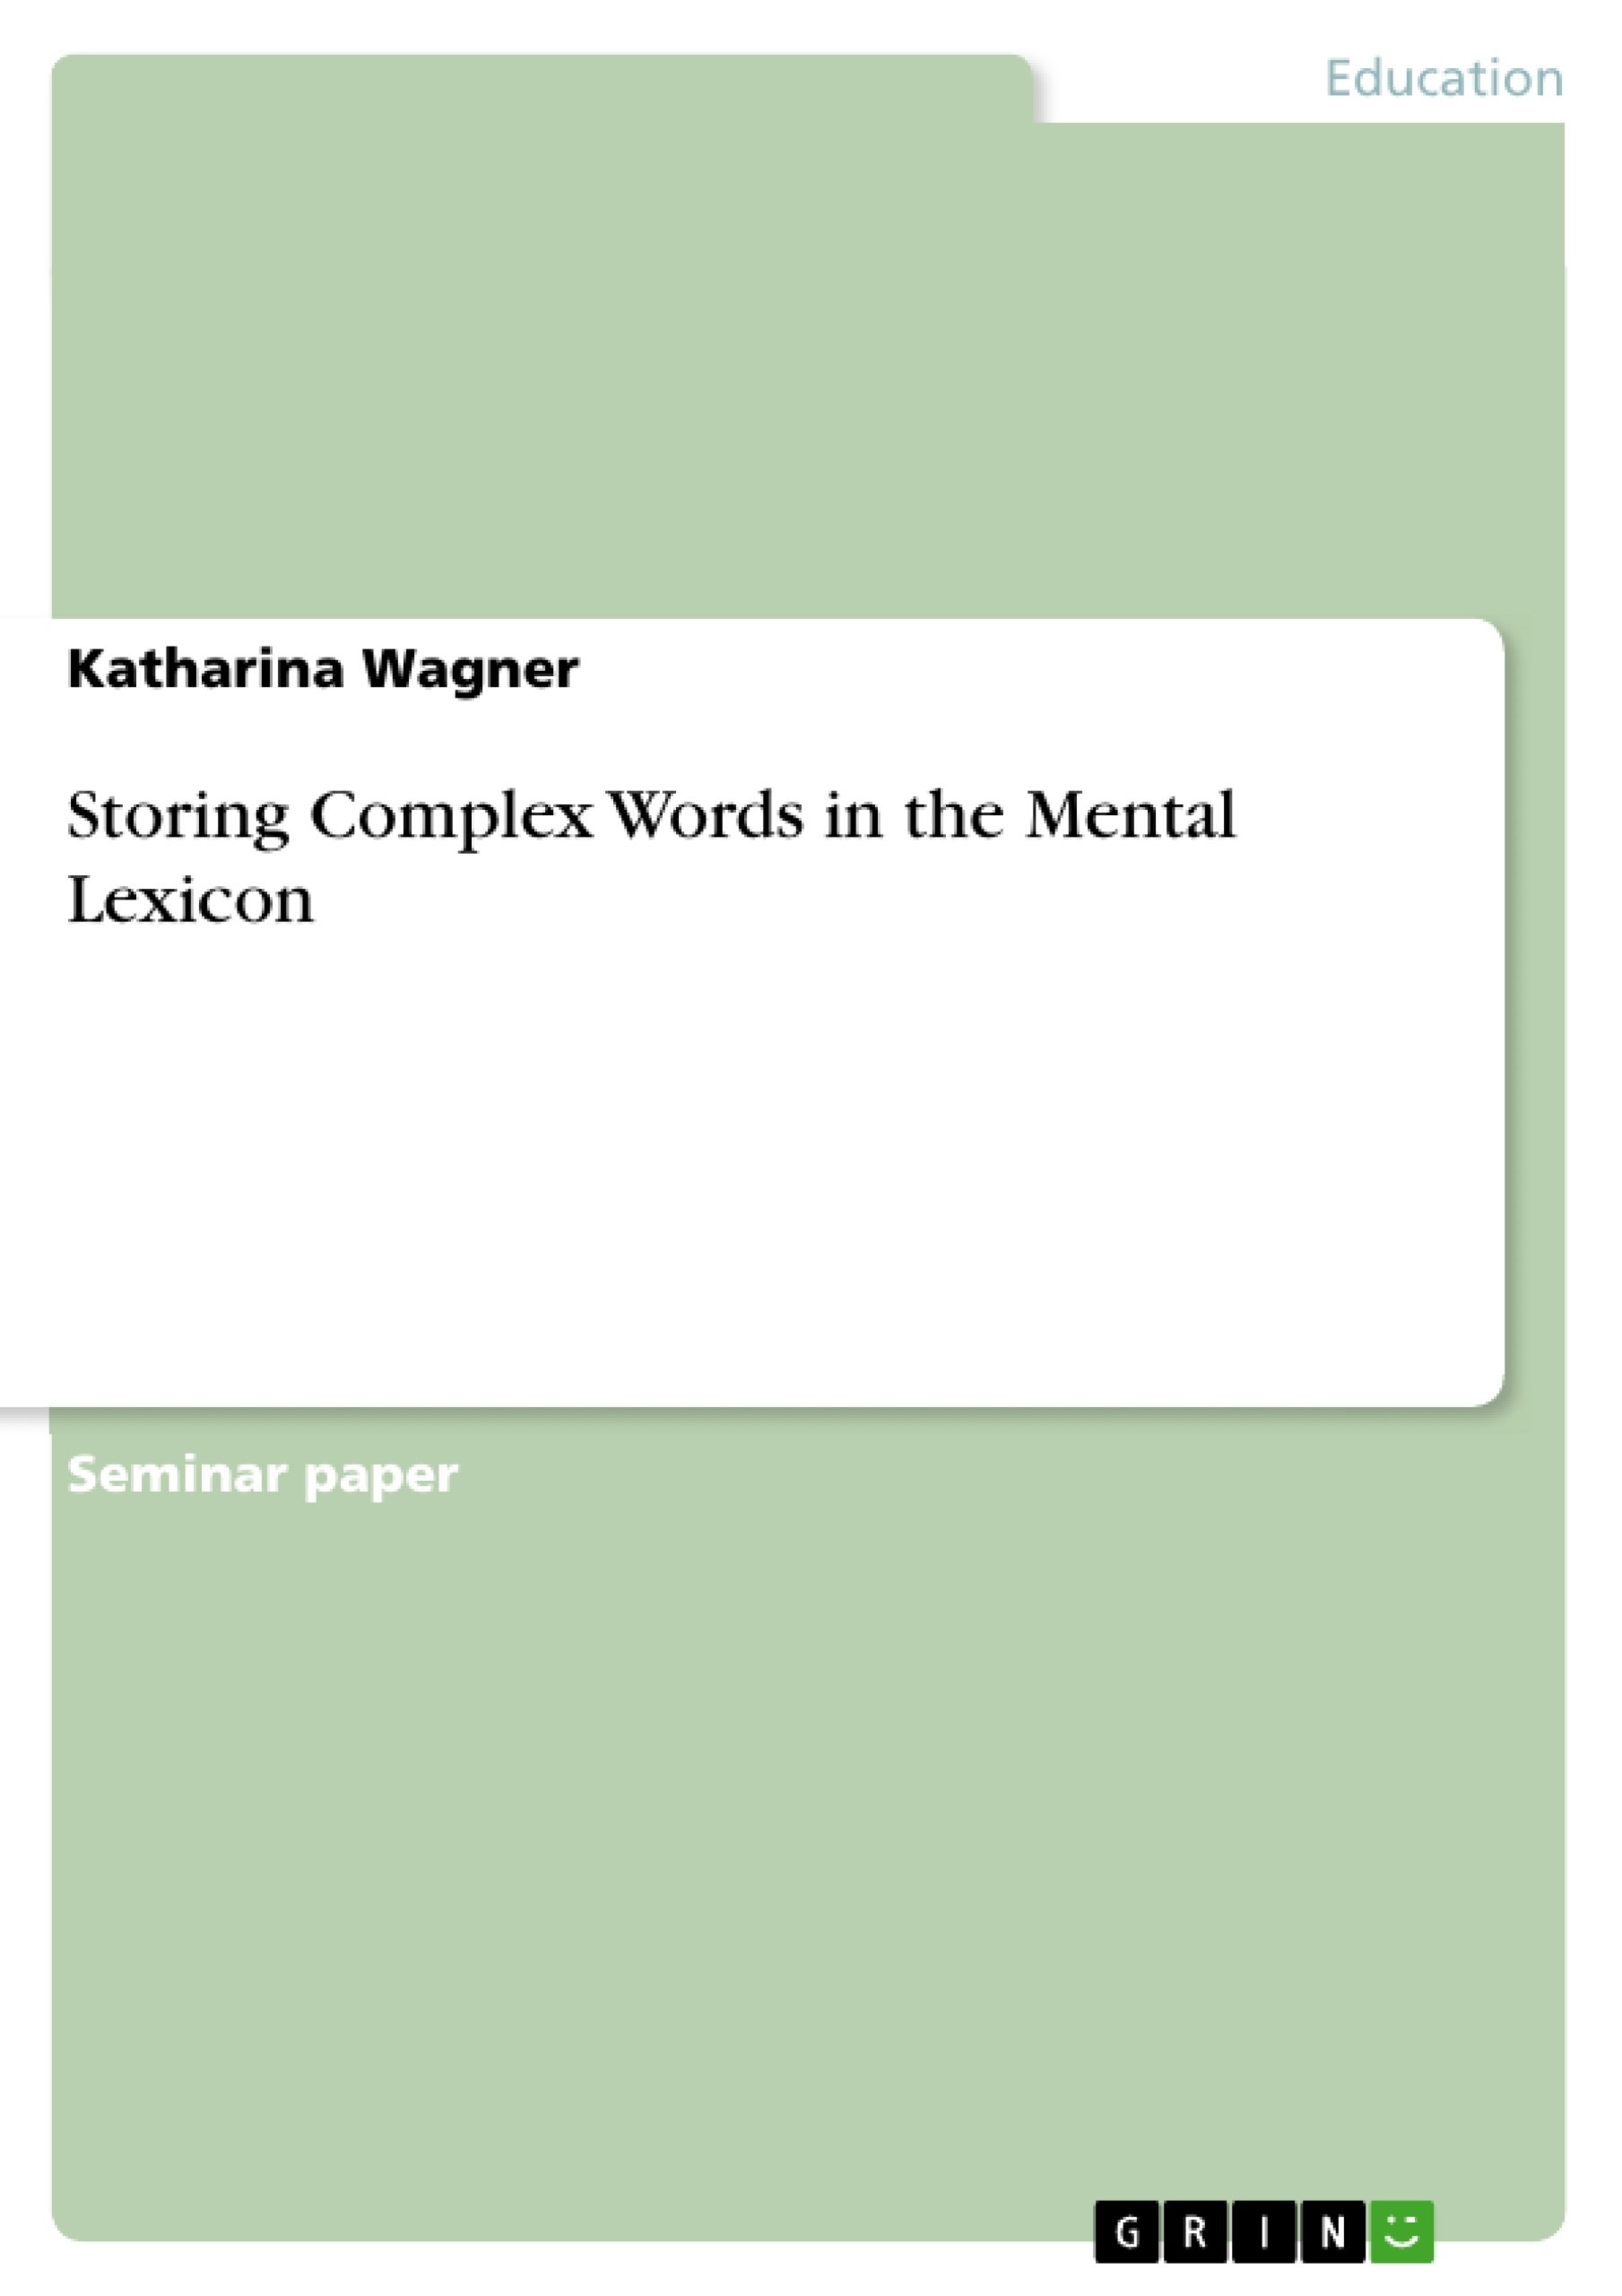 Title: Storing Complex Words in the Mental Lexicon